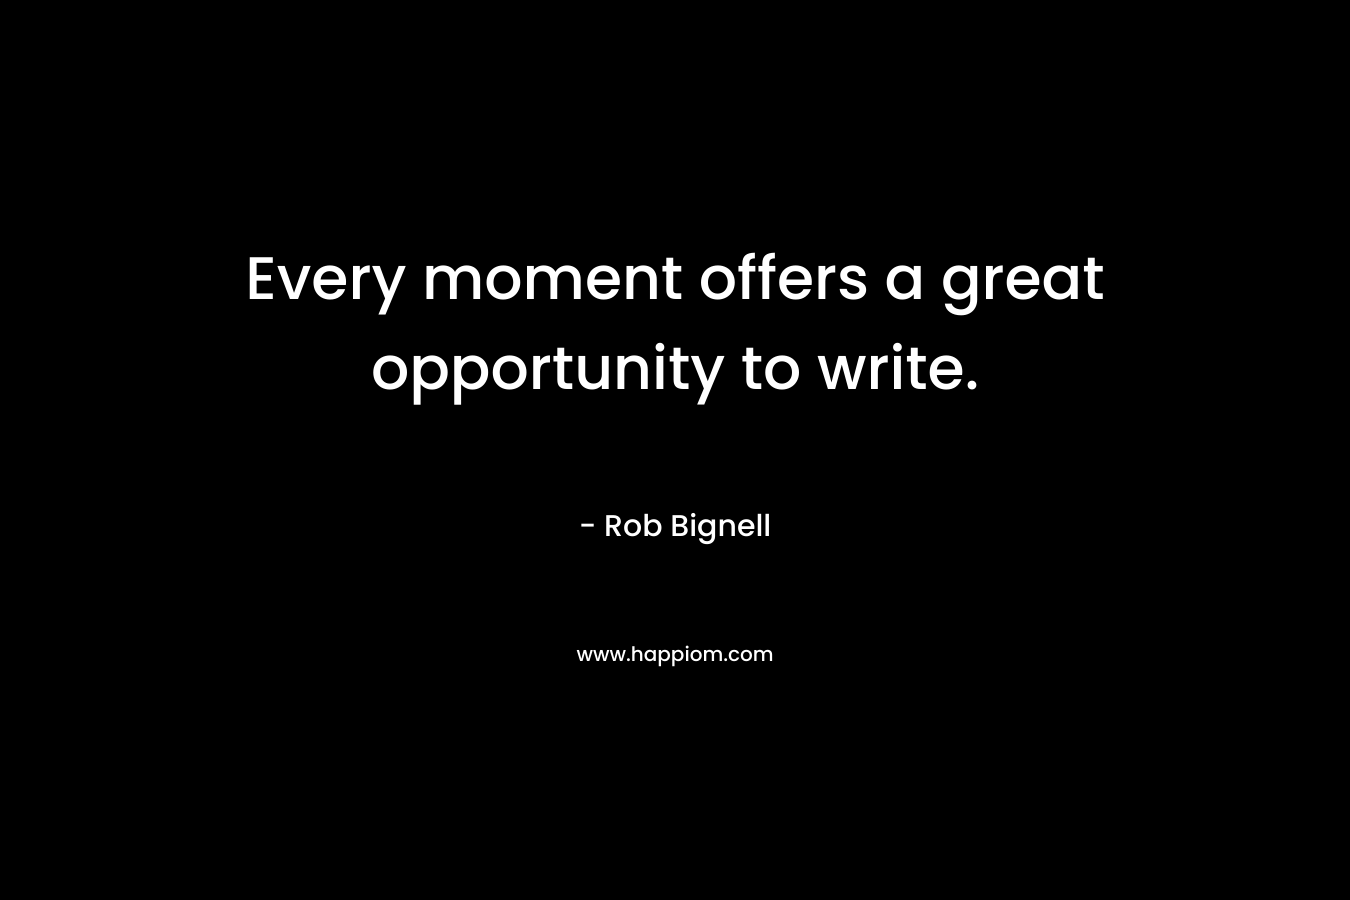 Every moment offers a great opportunity to write. – Rob Bignell